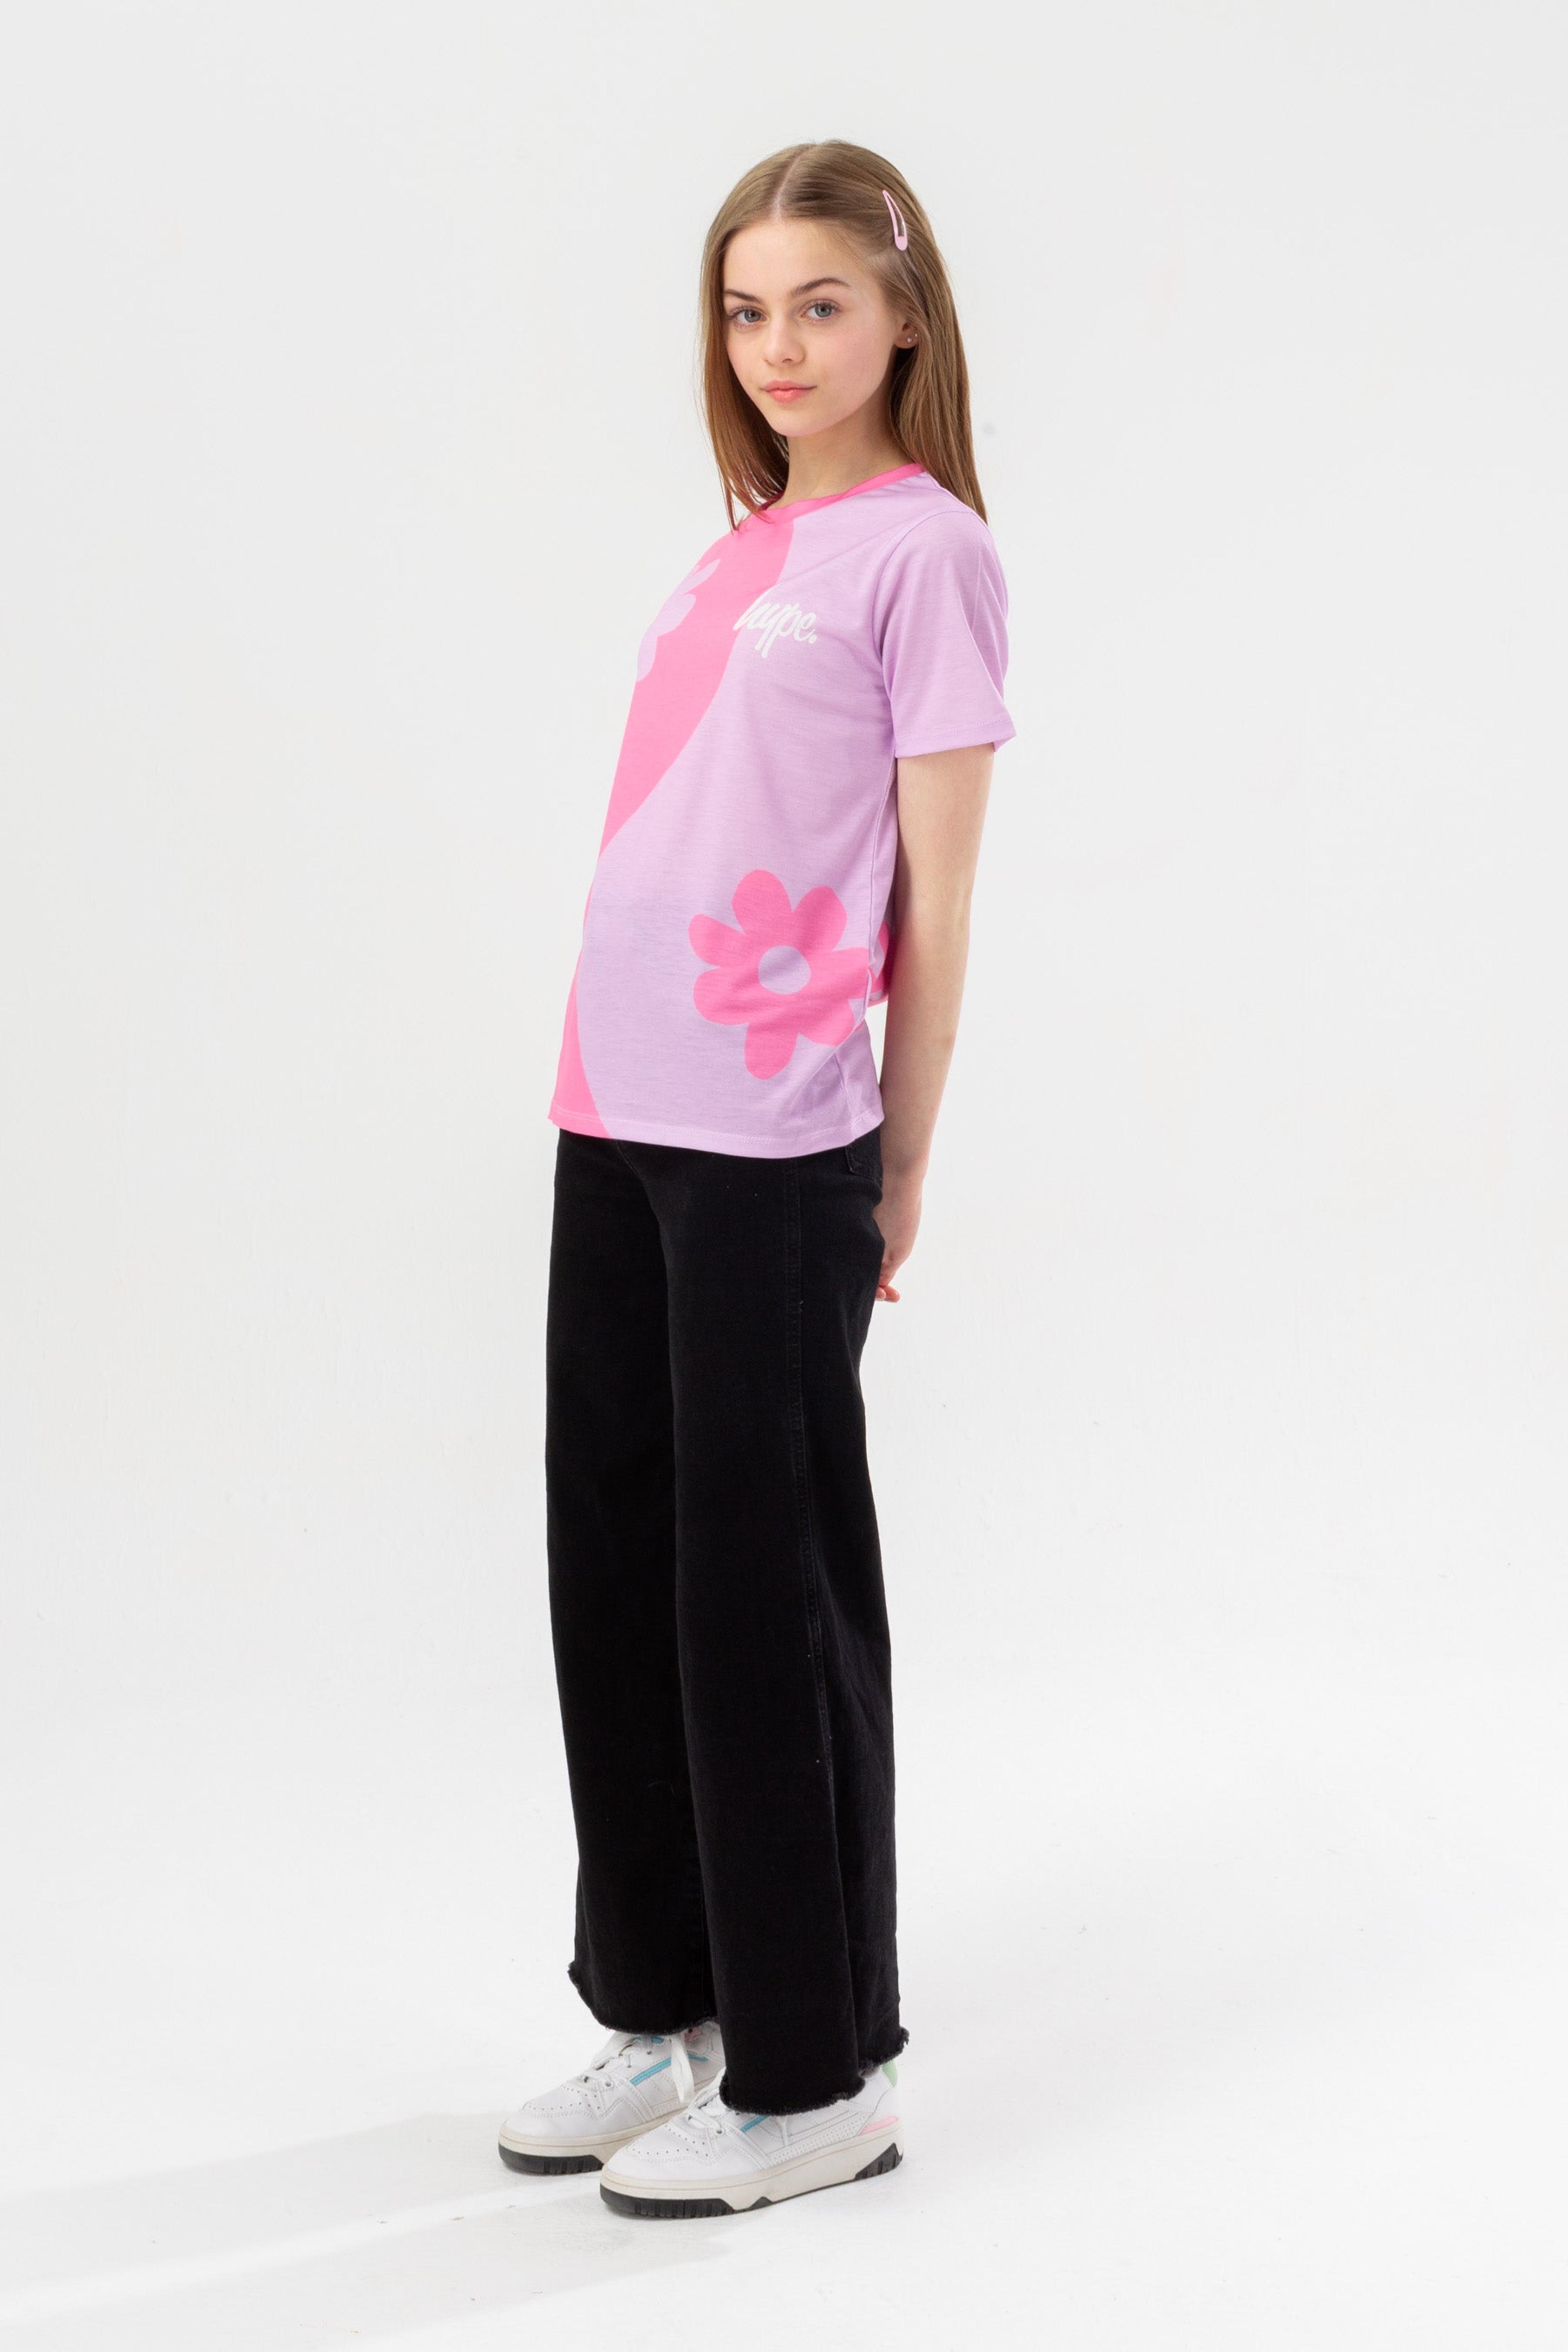 Alternate View 2 of HYPE GIRLS PINK FLORAL YING YANG SCRIPT T-SHIRT